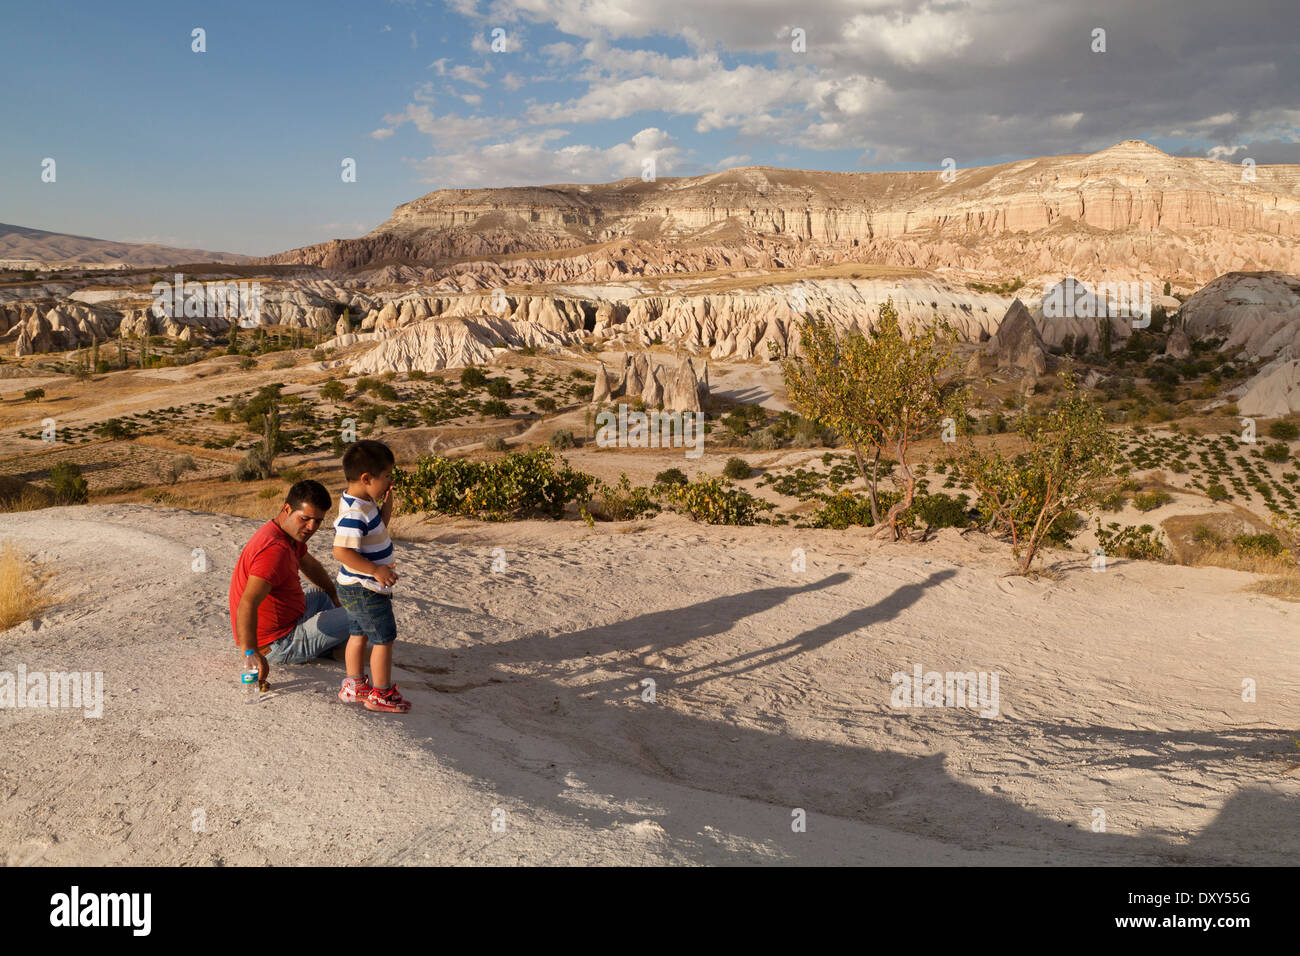 A father and son enjoying the views of the Rose Valley in Cappadocia Stock Photo